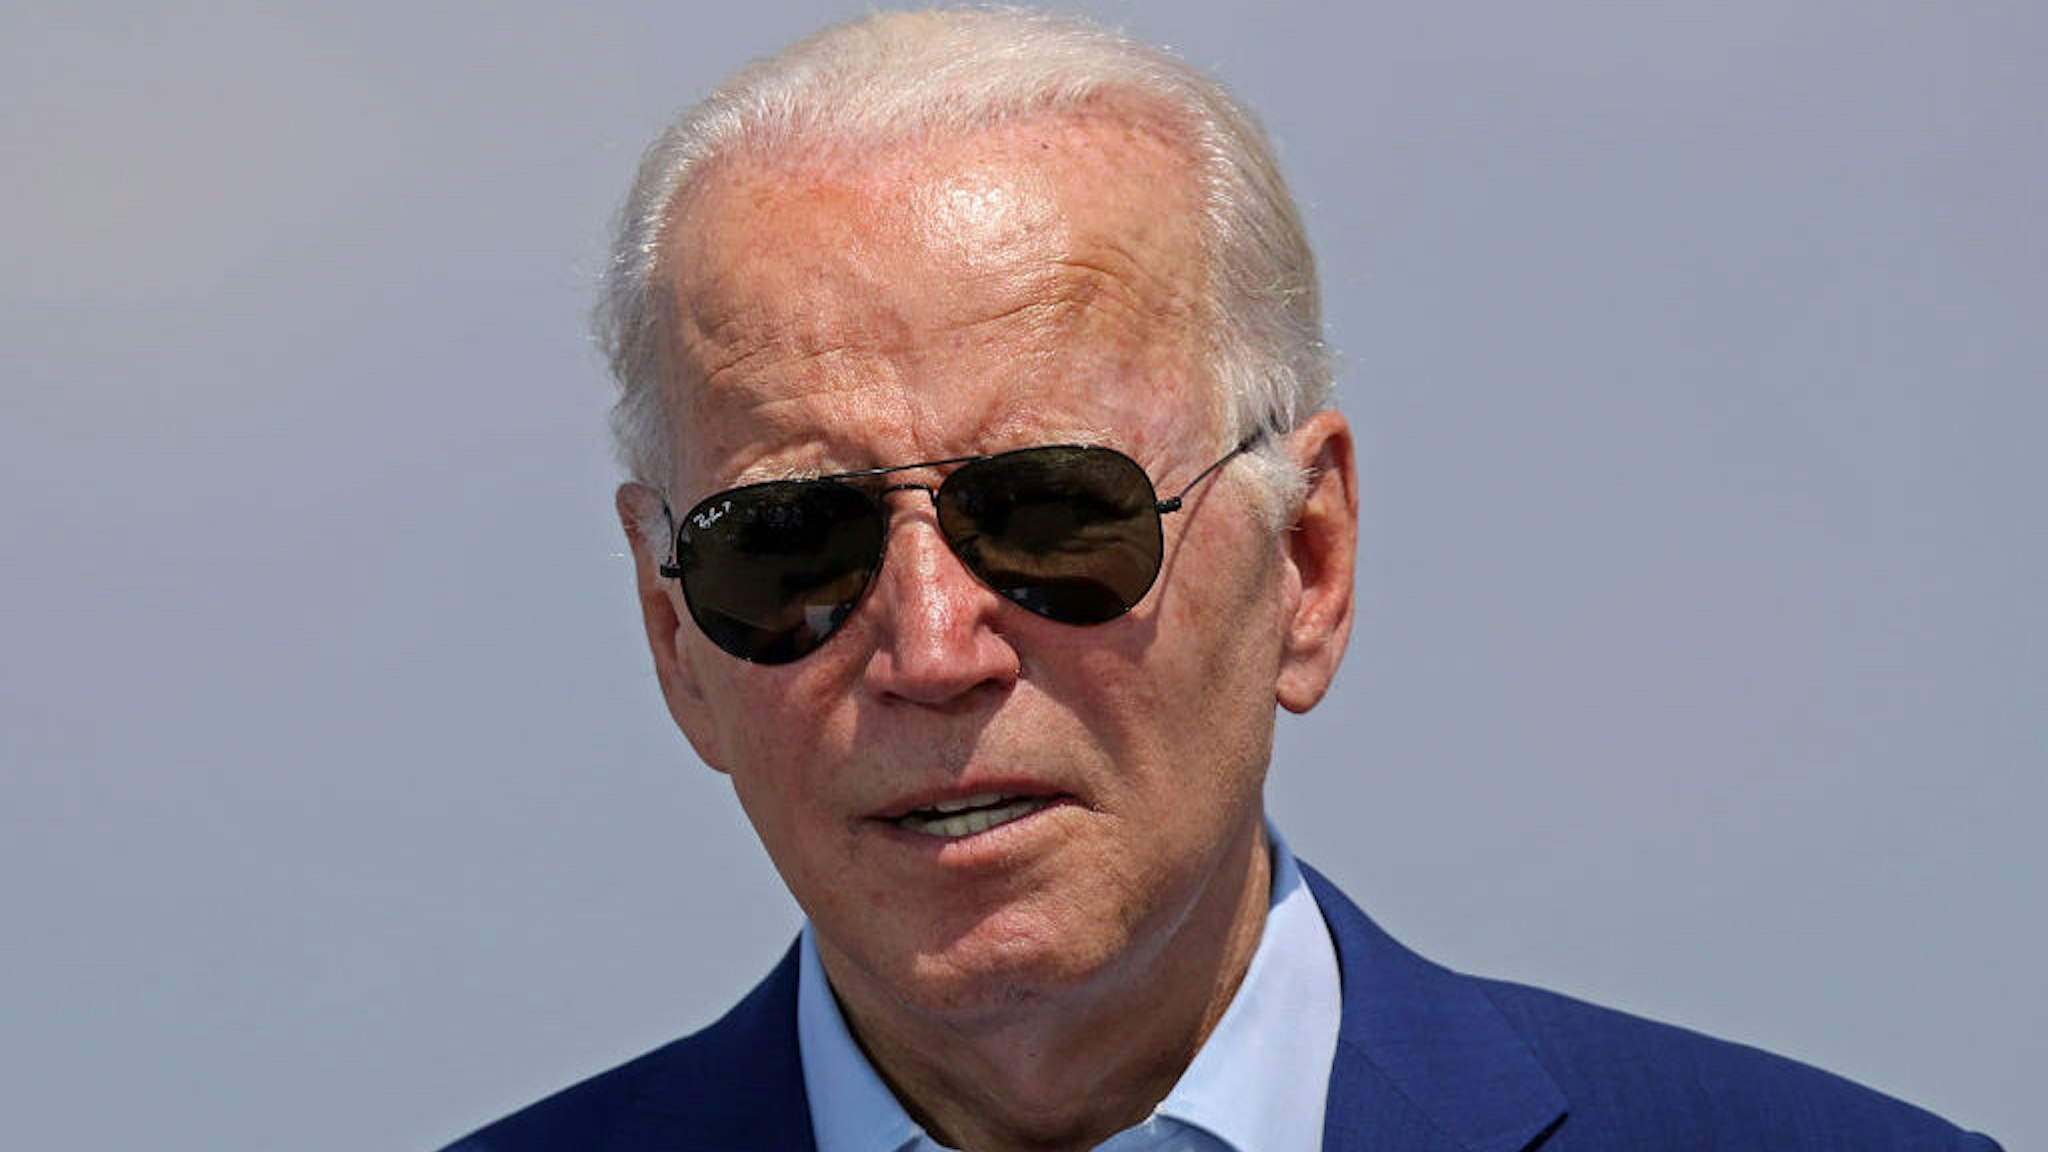 Somerset, MA - July 20: President Joe Biden traveled to Somerset, MA to deliver remarks on tackling the climate crisis and seizing the opportunity of a clean energy future to create jobs and lower costs for families. Biden unveiled the latest efforts during a visit to the former coal-fired Brayton Point power plant, which is shifting to offshore wind manufacturing. It's the embodiment of the transition to clean energy that Biden is seeking. (Photo by David L. Ryan/The Boston Globe via Getty Images)